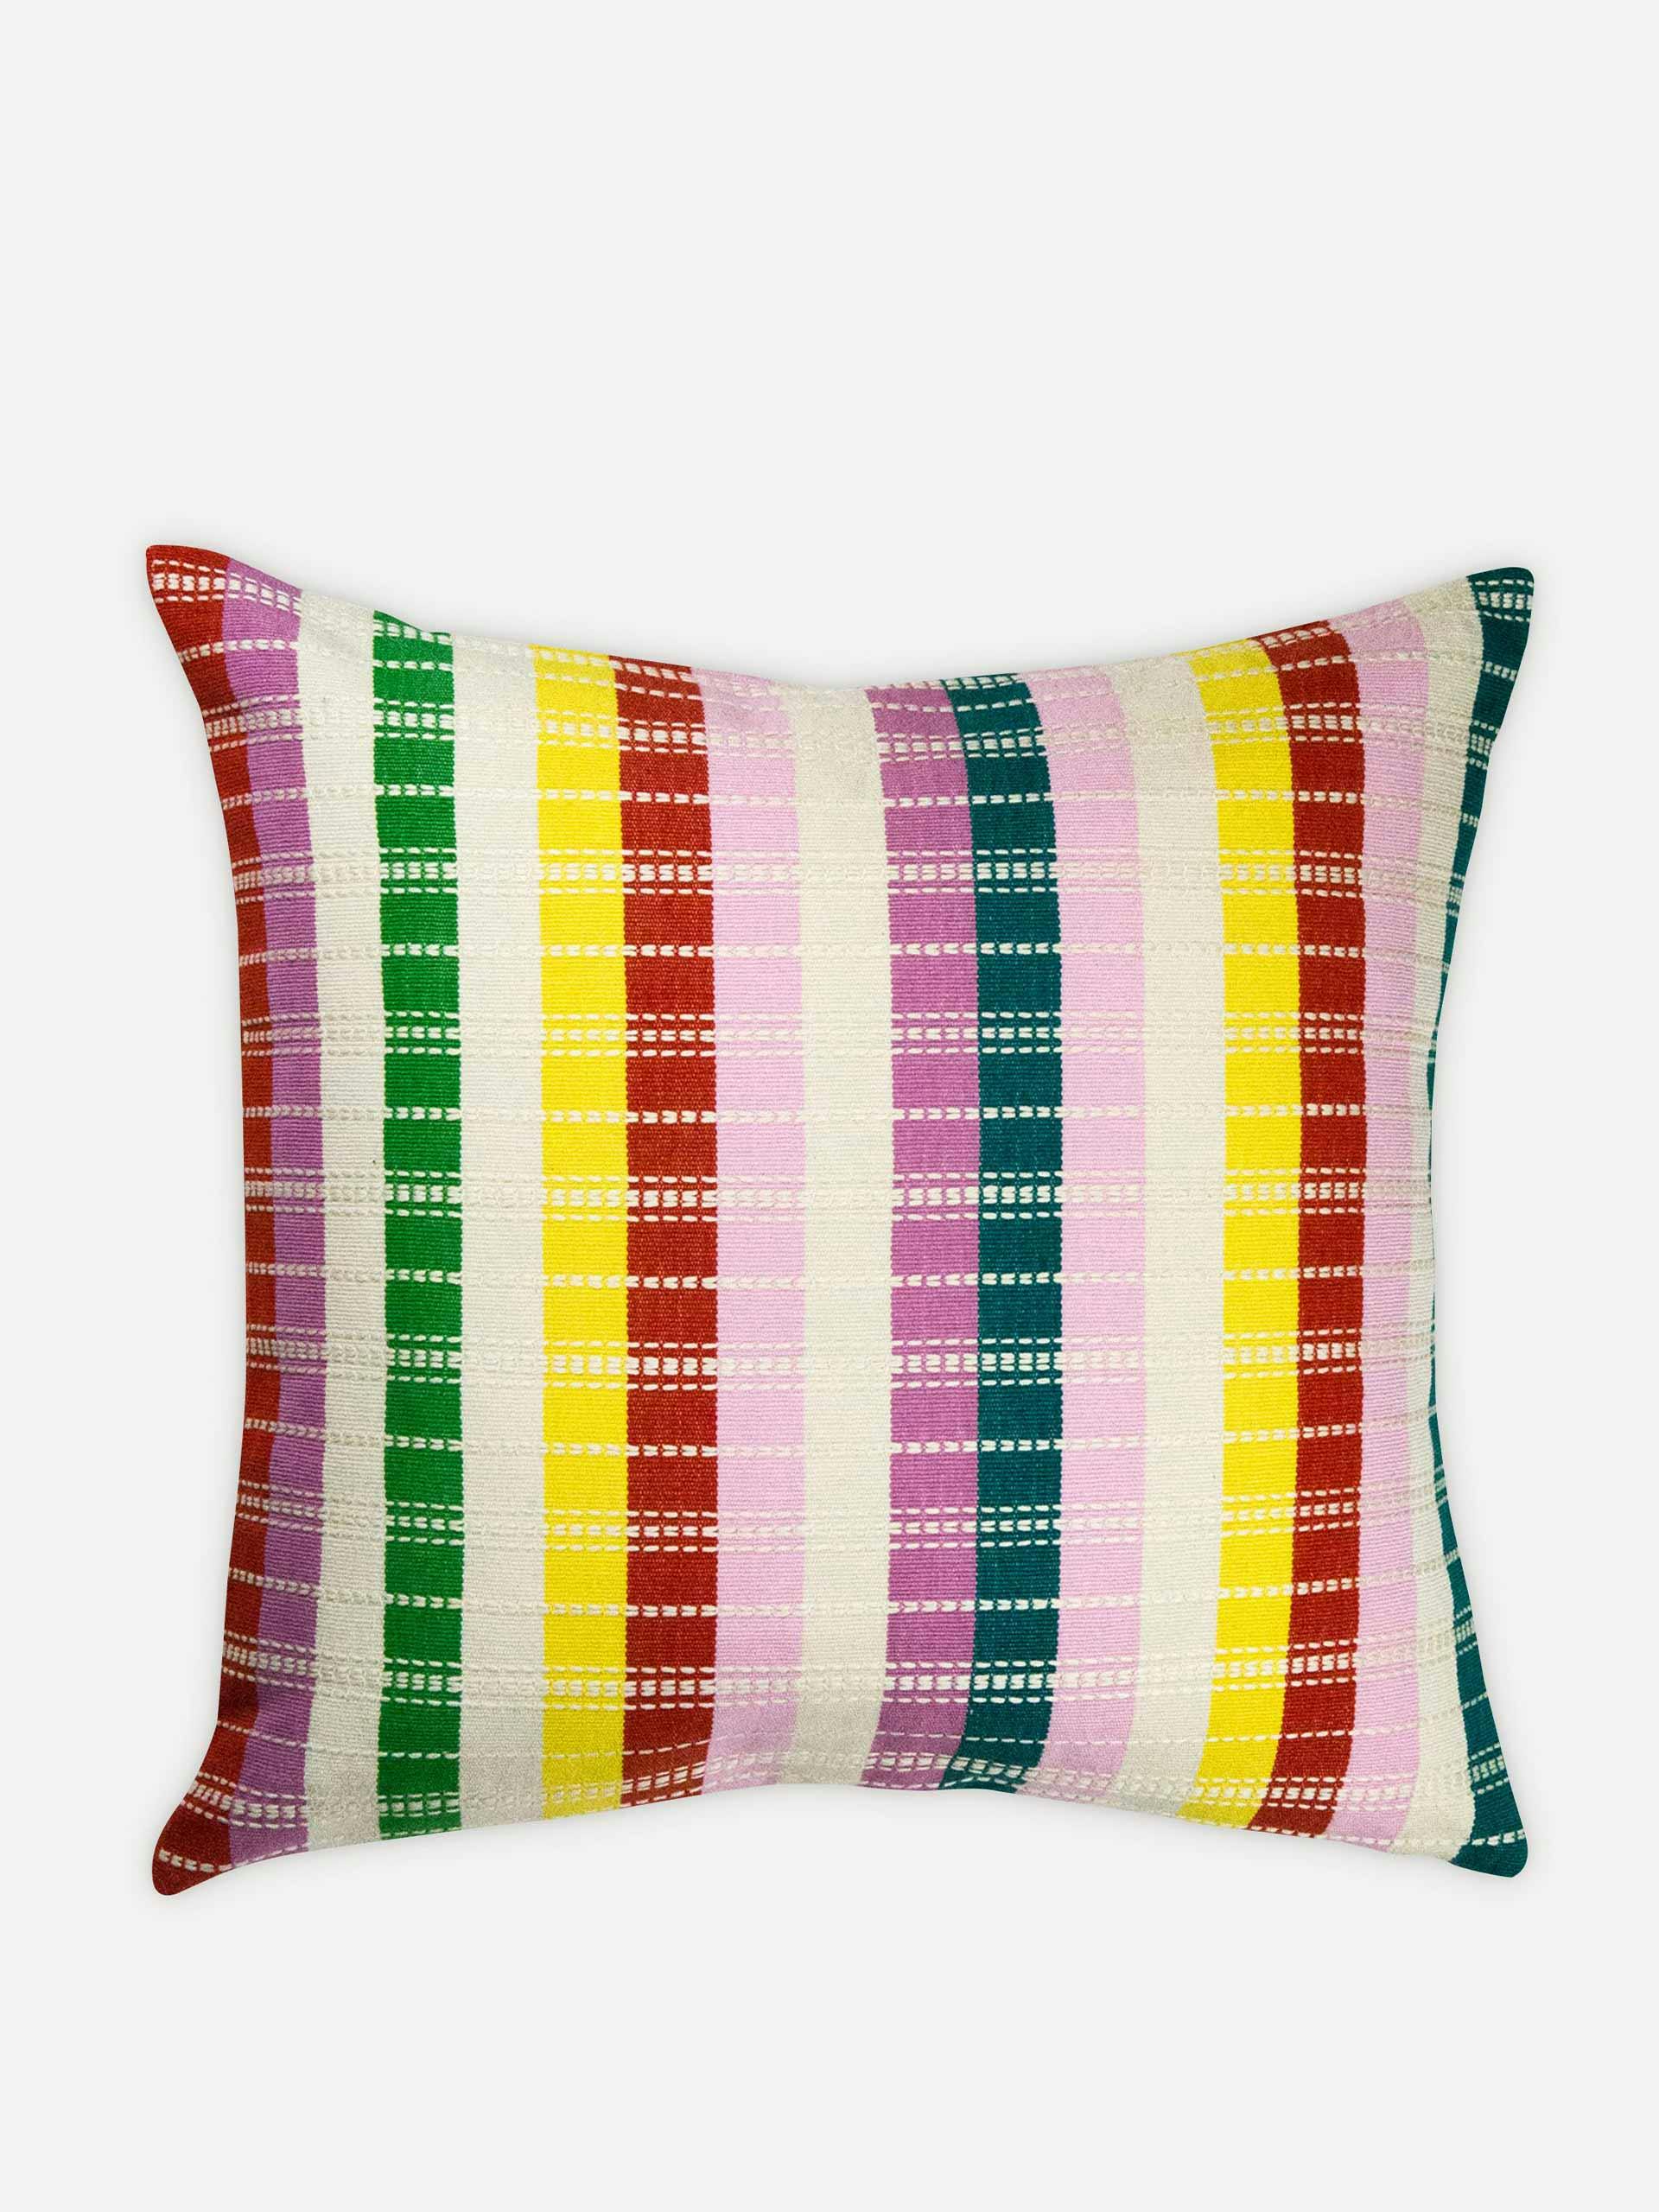 Rainbow pattered pillow